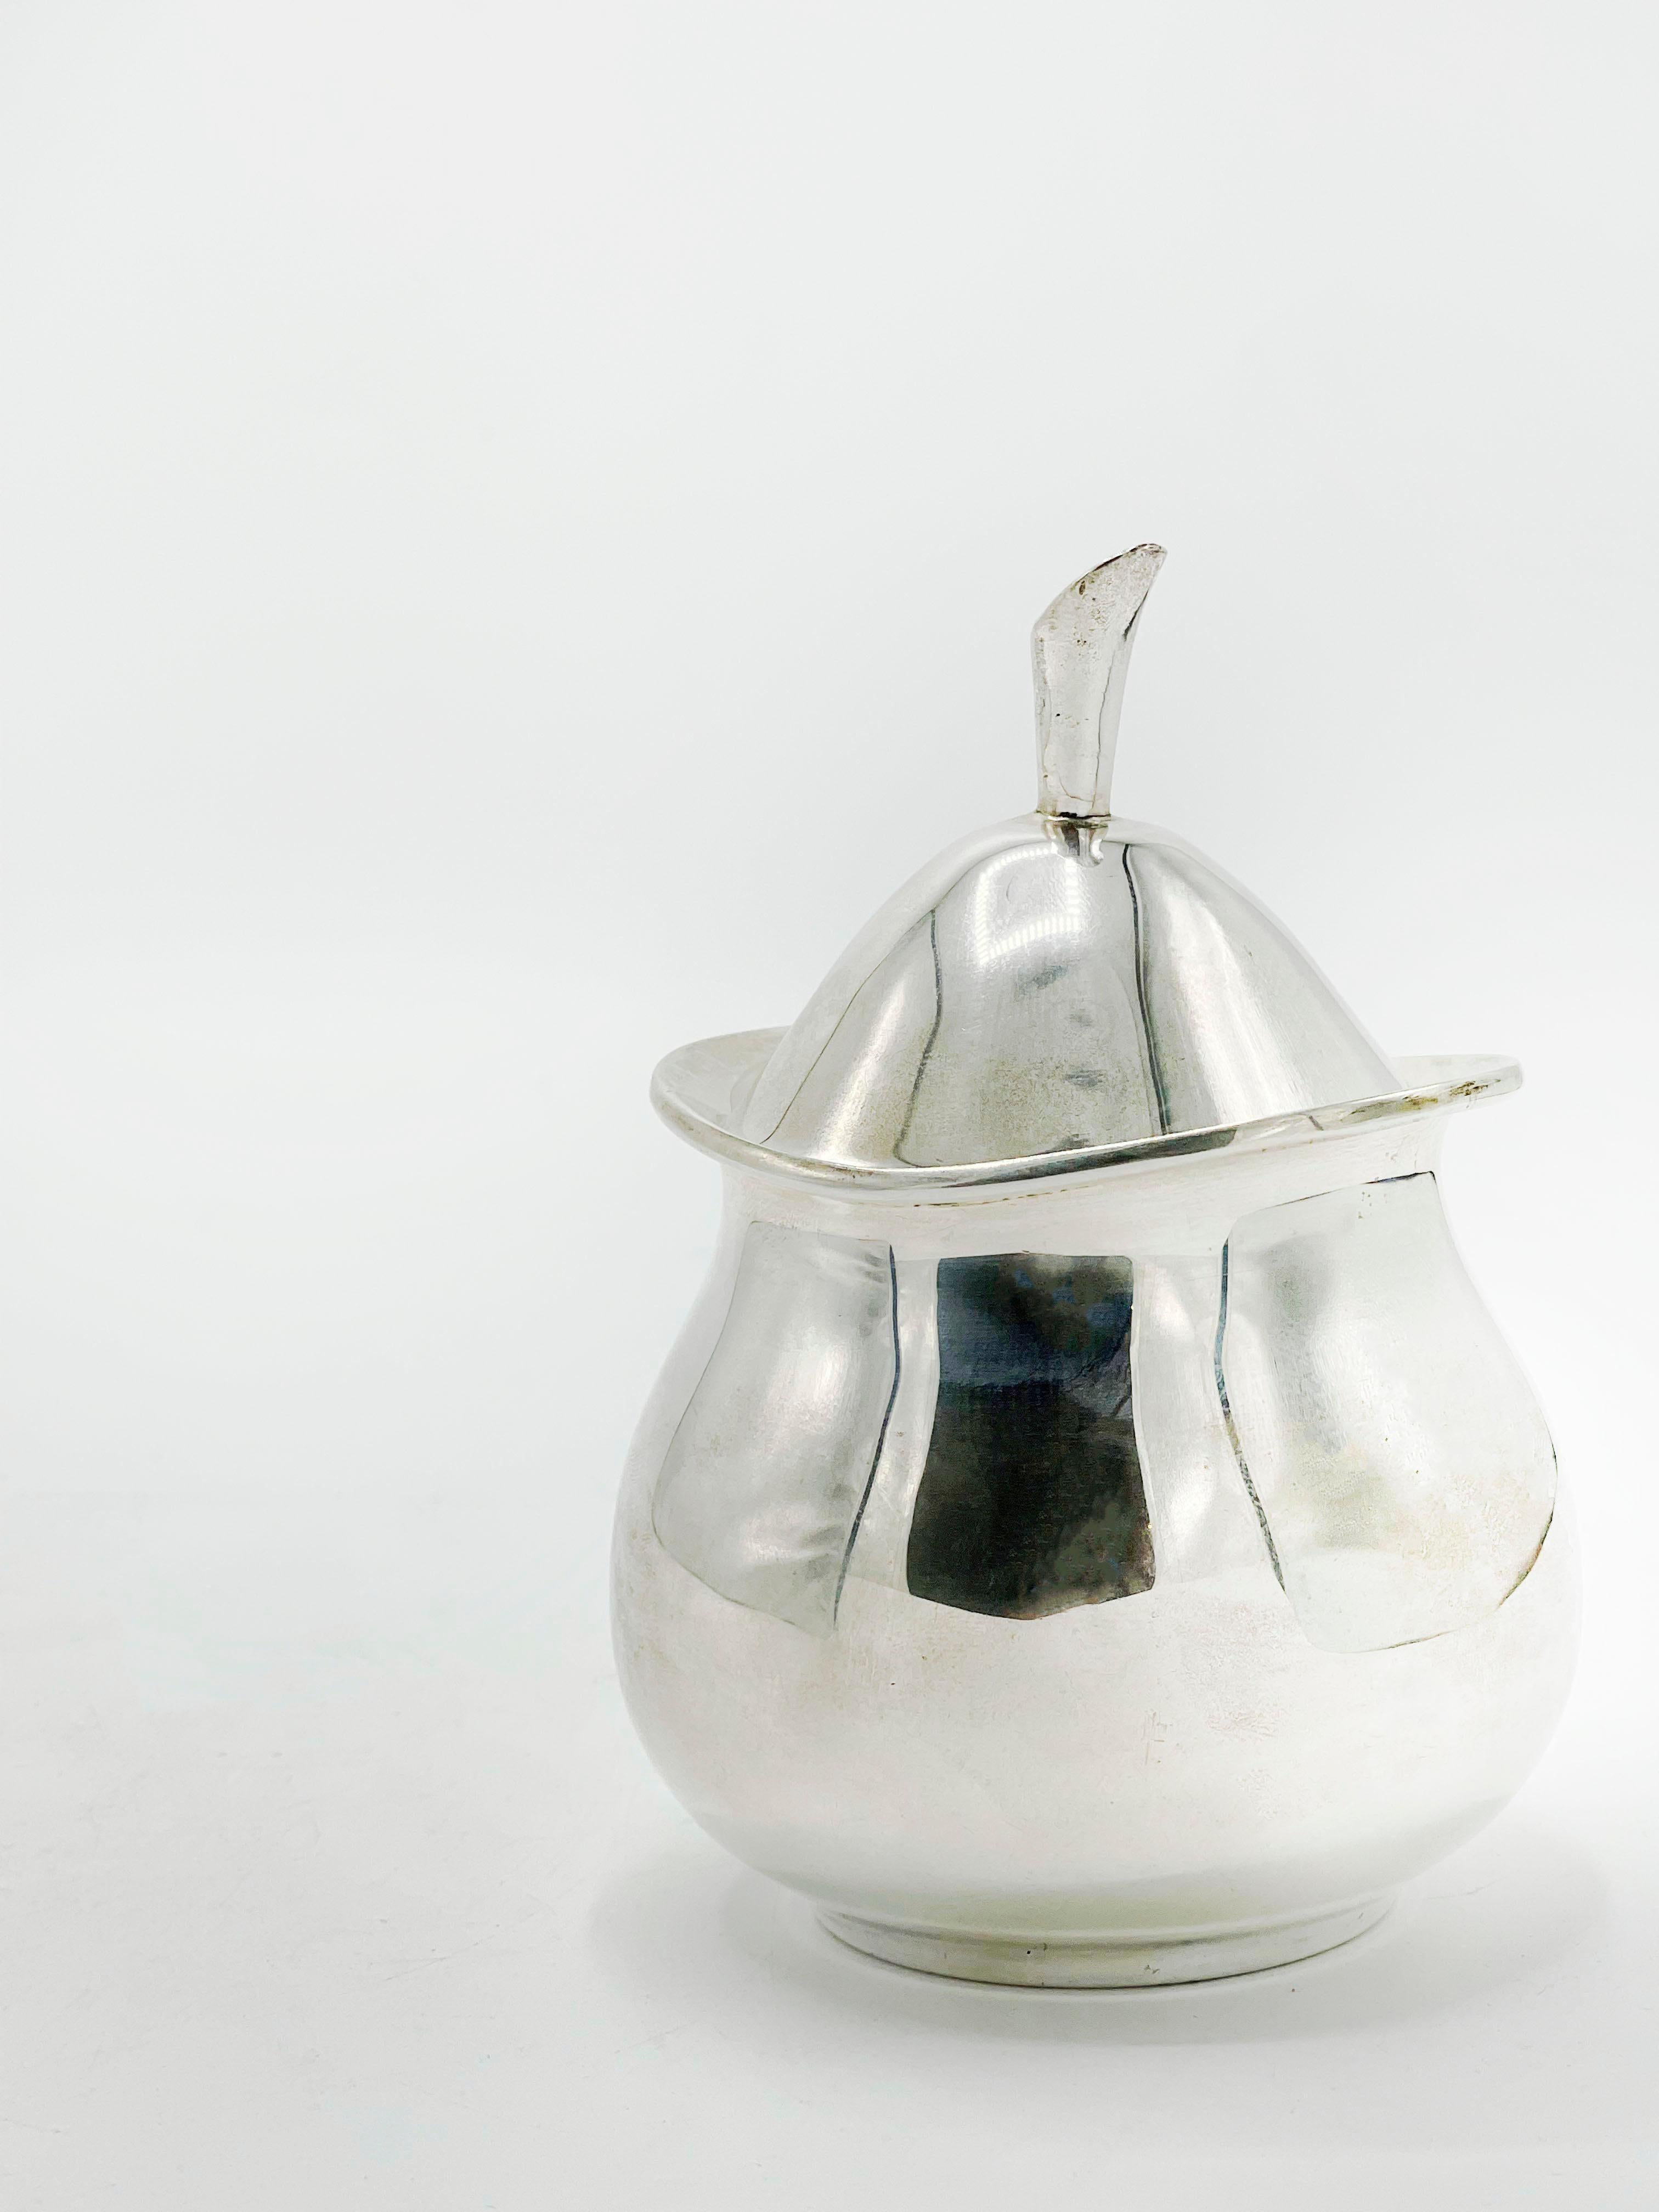 Pear sugar bowl, Georg Jensen in sterling silver
Beautiful Art Deco silver sugar bowl with a simple but striking design due to its pear shape, which is what makes it stand out.
Measures:
Height: 13 centimeters
Diameter: 8.5 centimeters